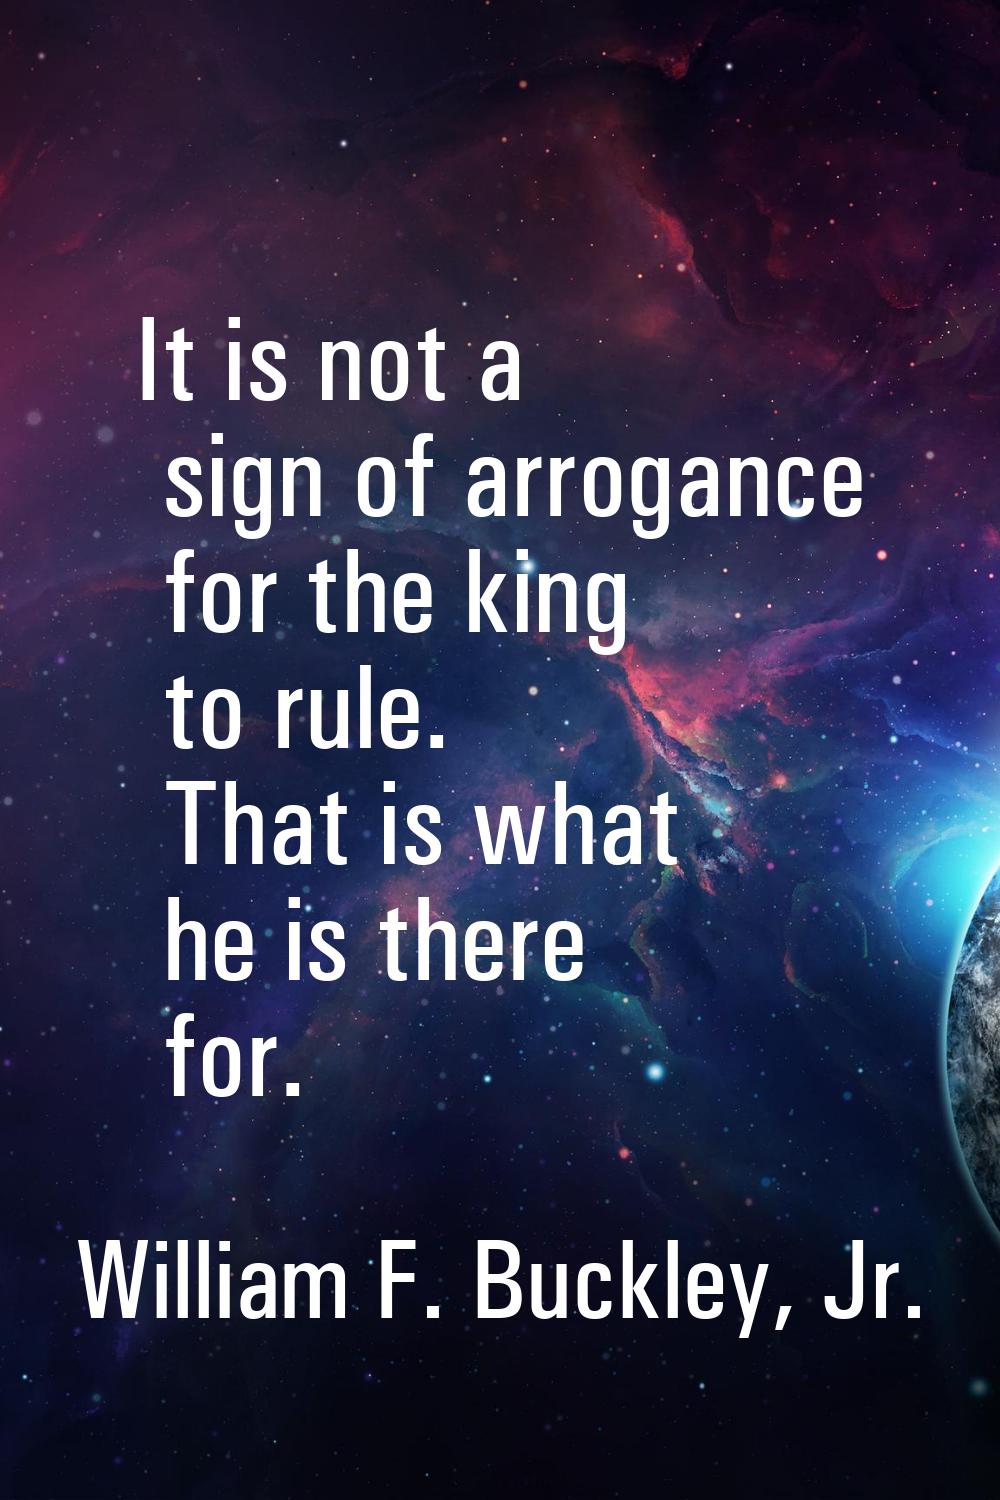 It is not a sign of arrogance for the king to rule. That is what he is there for.